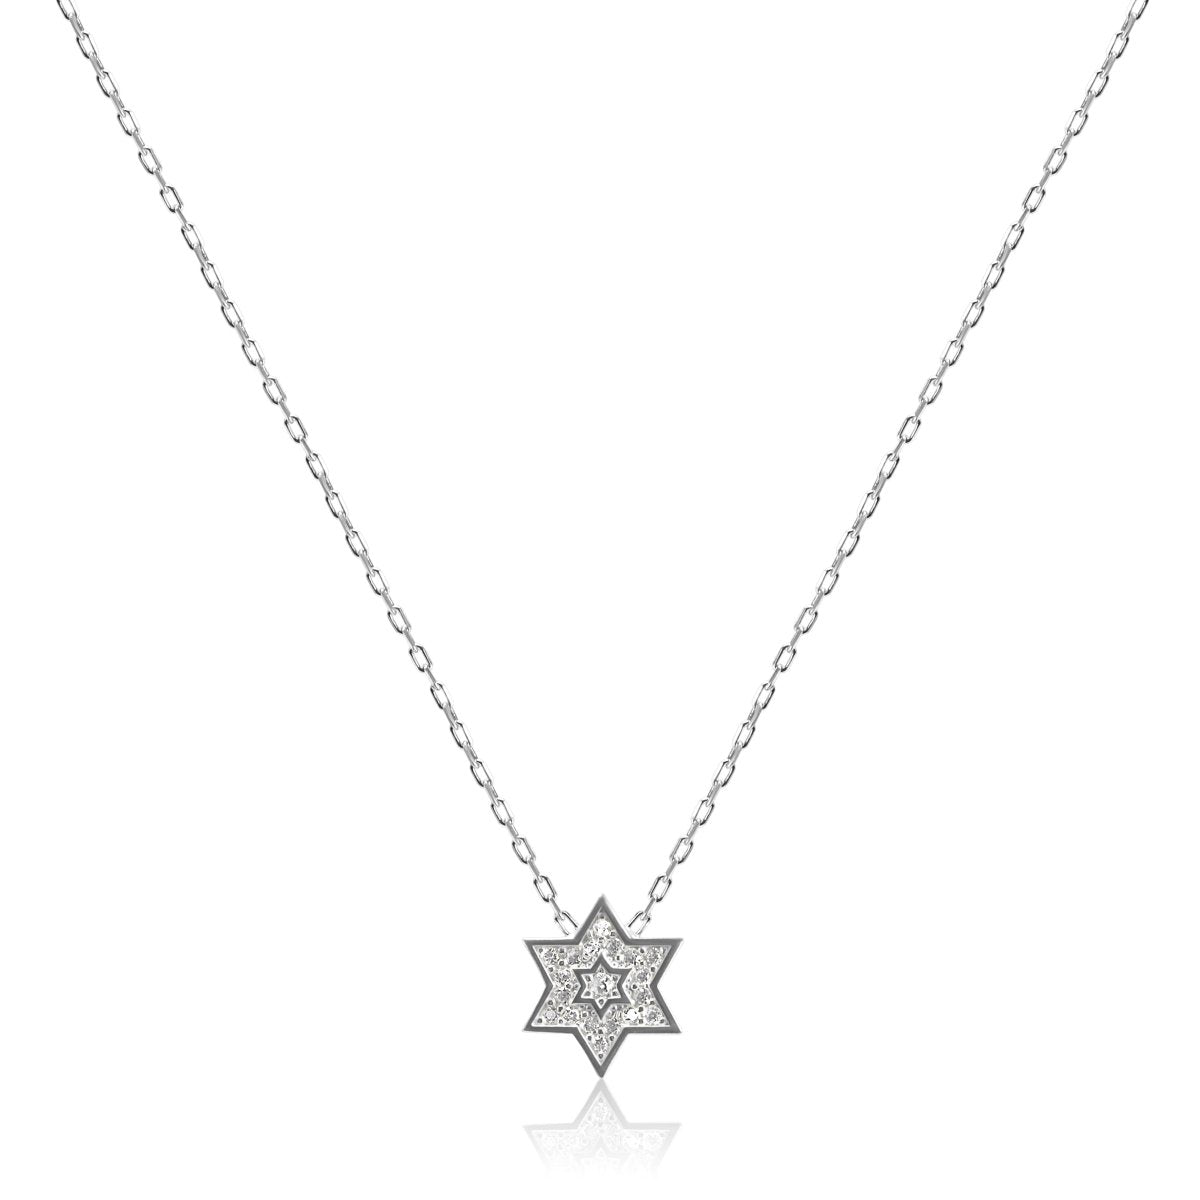 Every Day Jewish Star Necklace for Girls and Women